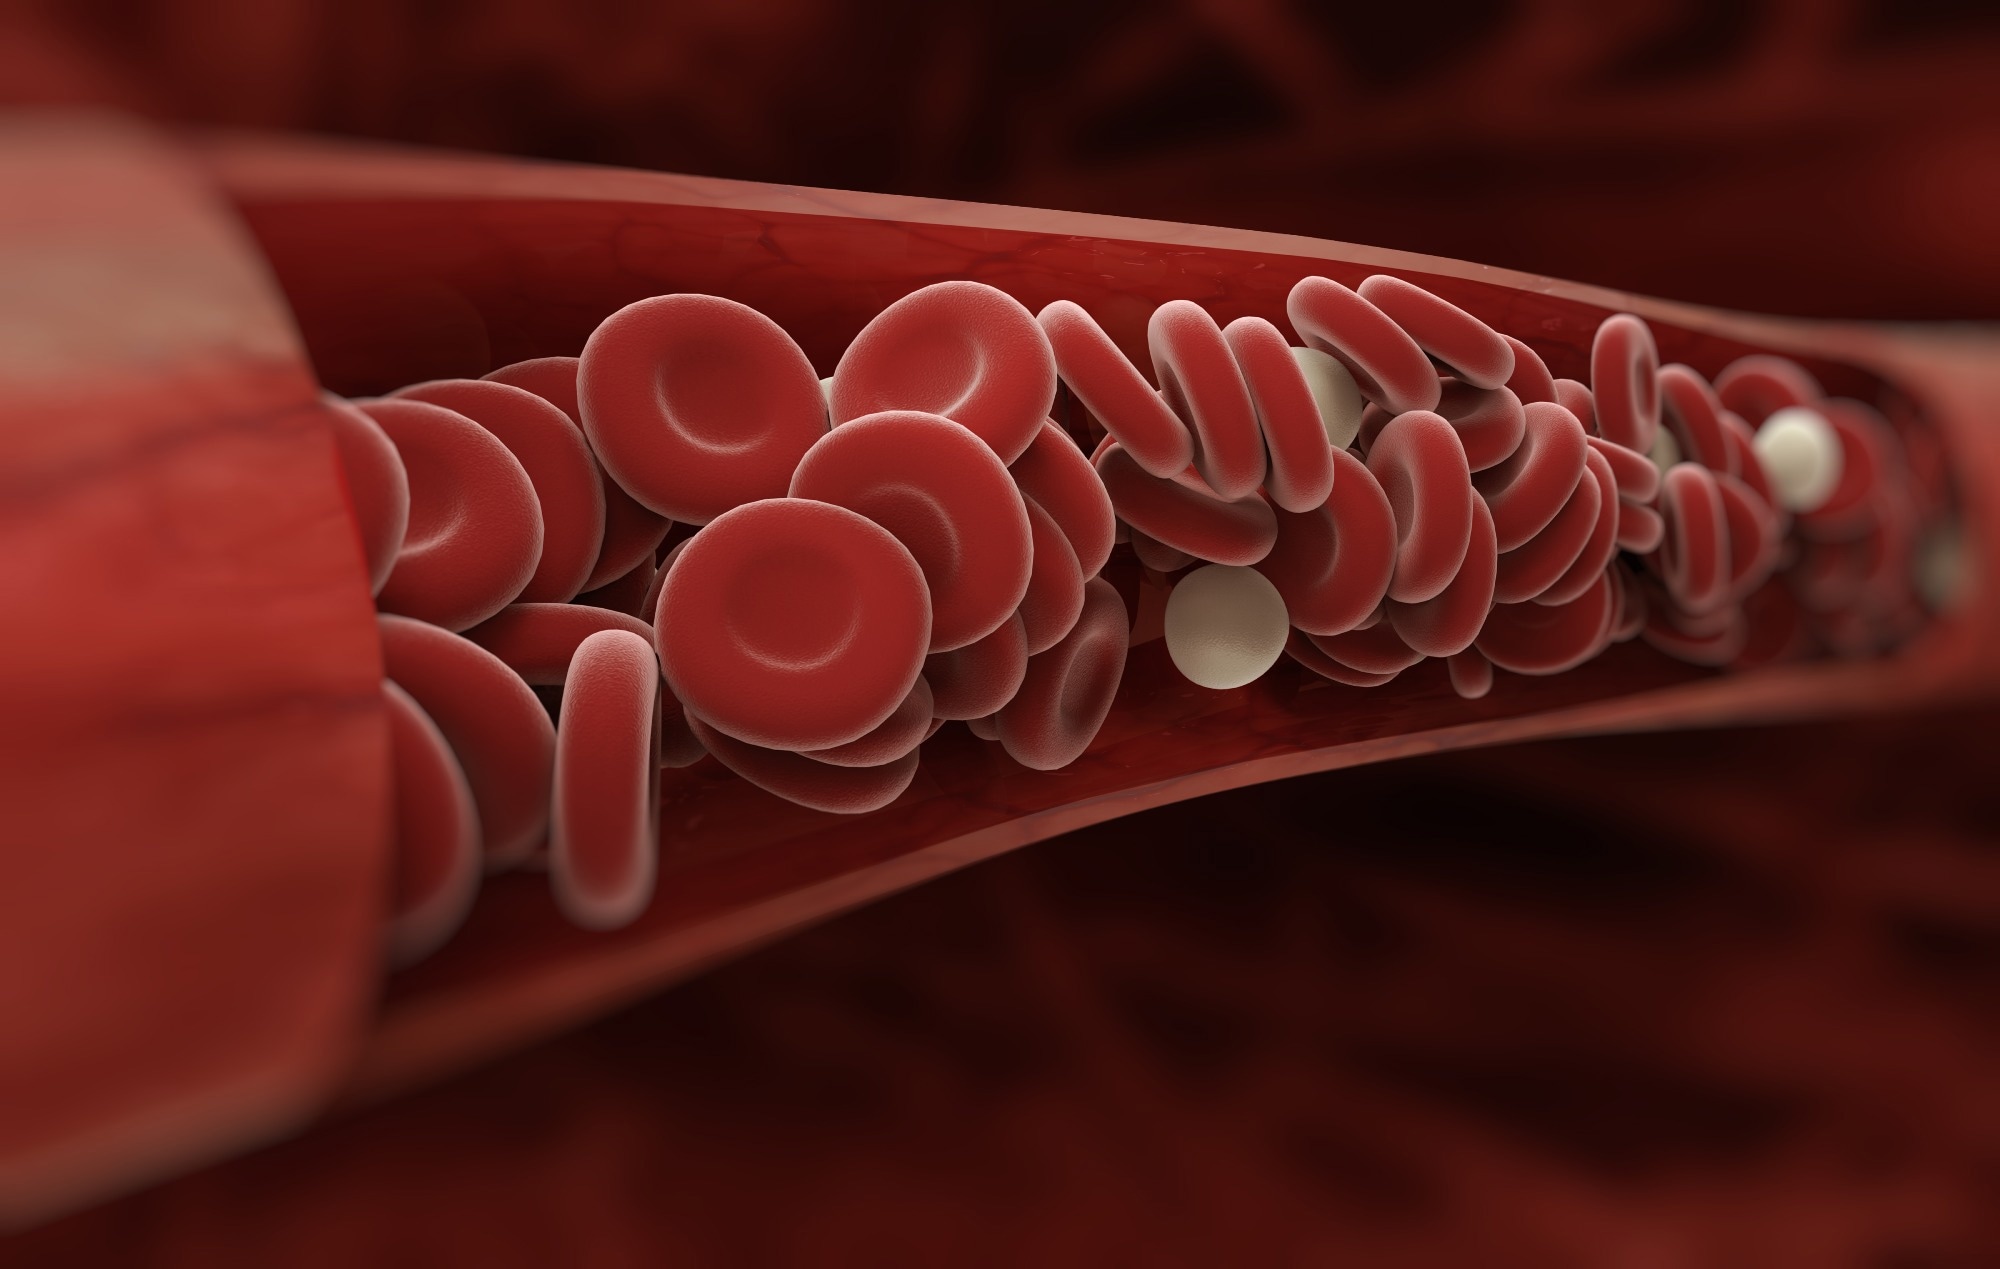 Study: Increased red blood cell deformation in children and adolescents after SARS-CoV-2 infection. Image Credit: adike/Shutterstock.com